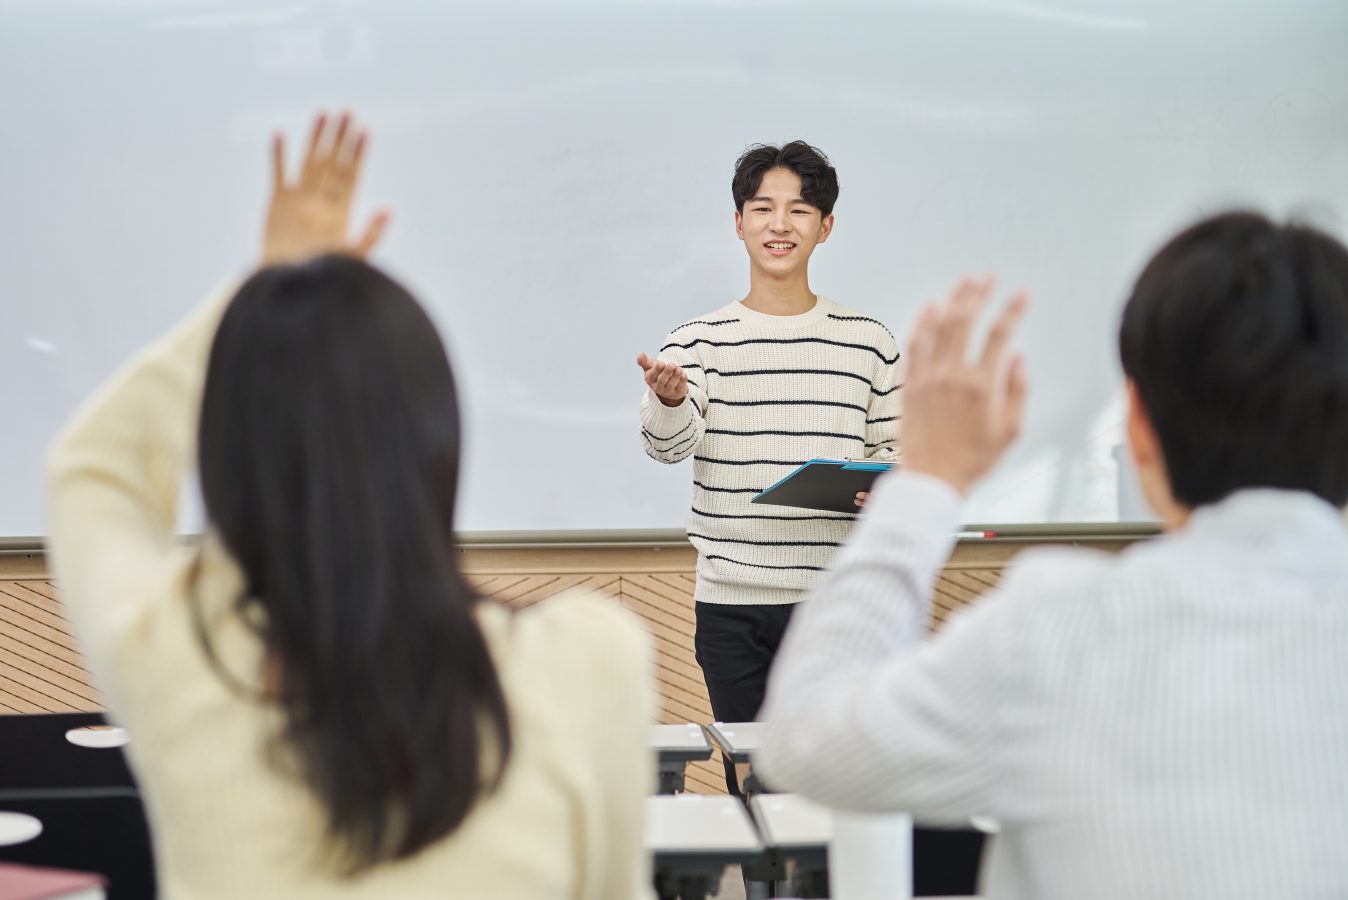 University students raise their hands in a classroom at an asian university.